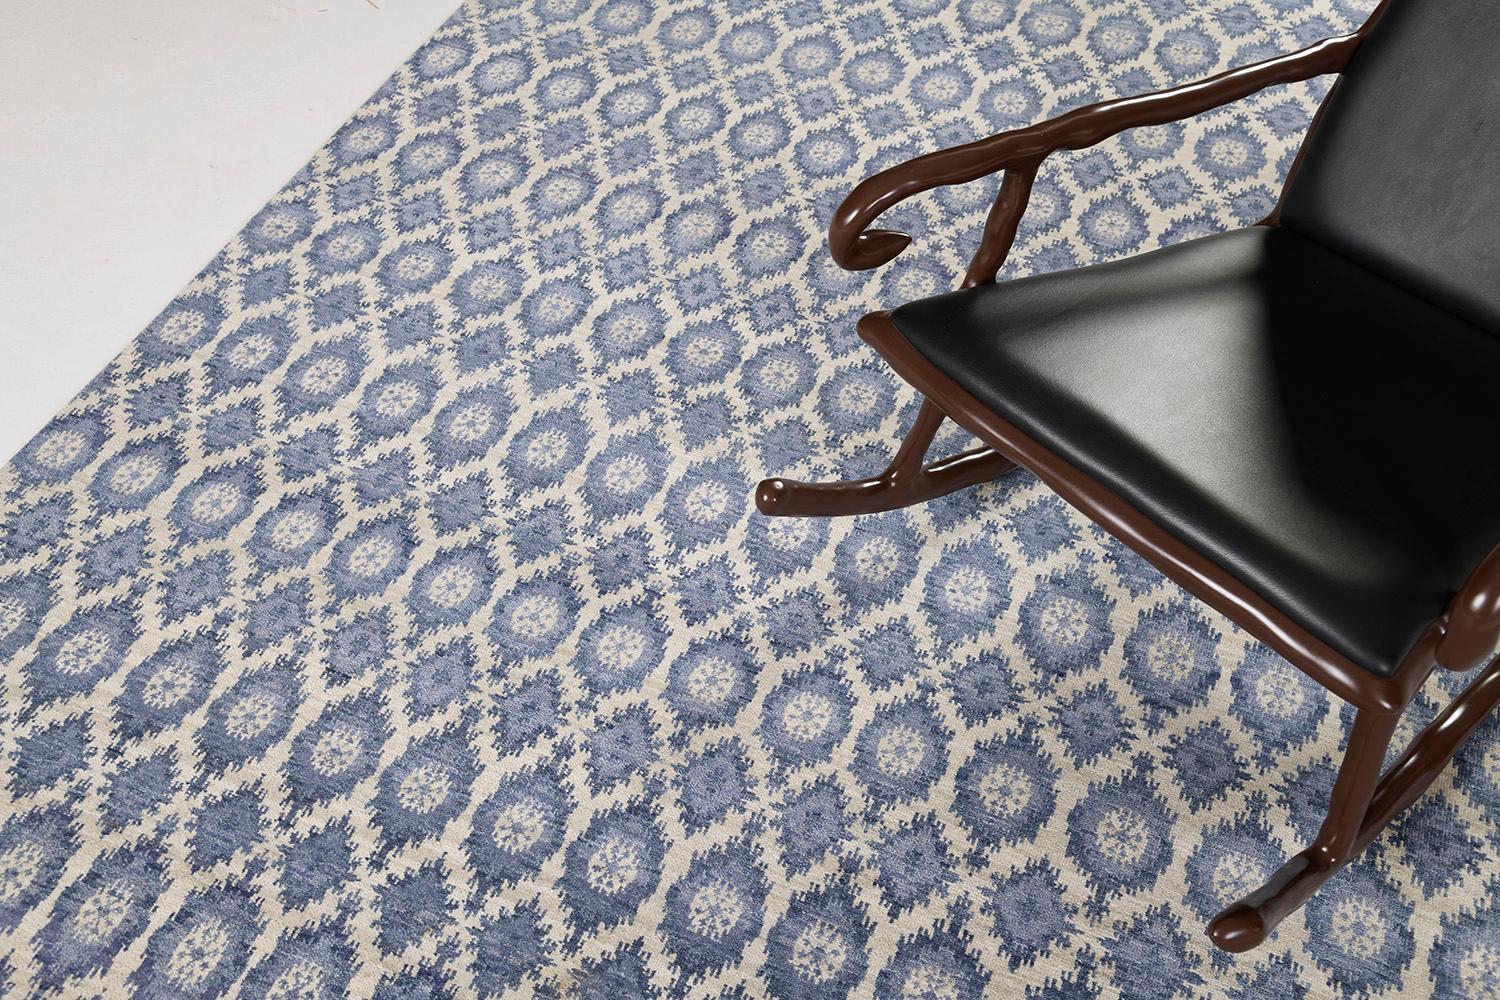 A spectacle of well-balanced symmetry in the stunning shades of cobalt blue and ivory. This fascinating rug not only capture one's stylish mind, but also adds meaning and depth due to its symbolical elements portraying protection from evil forces. A